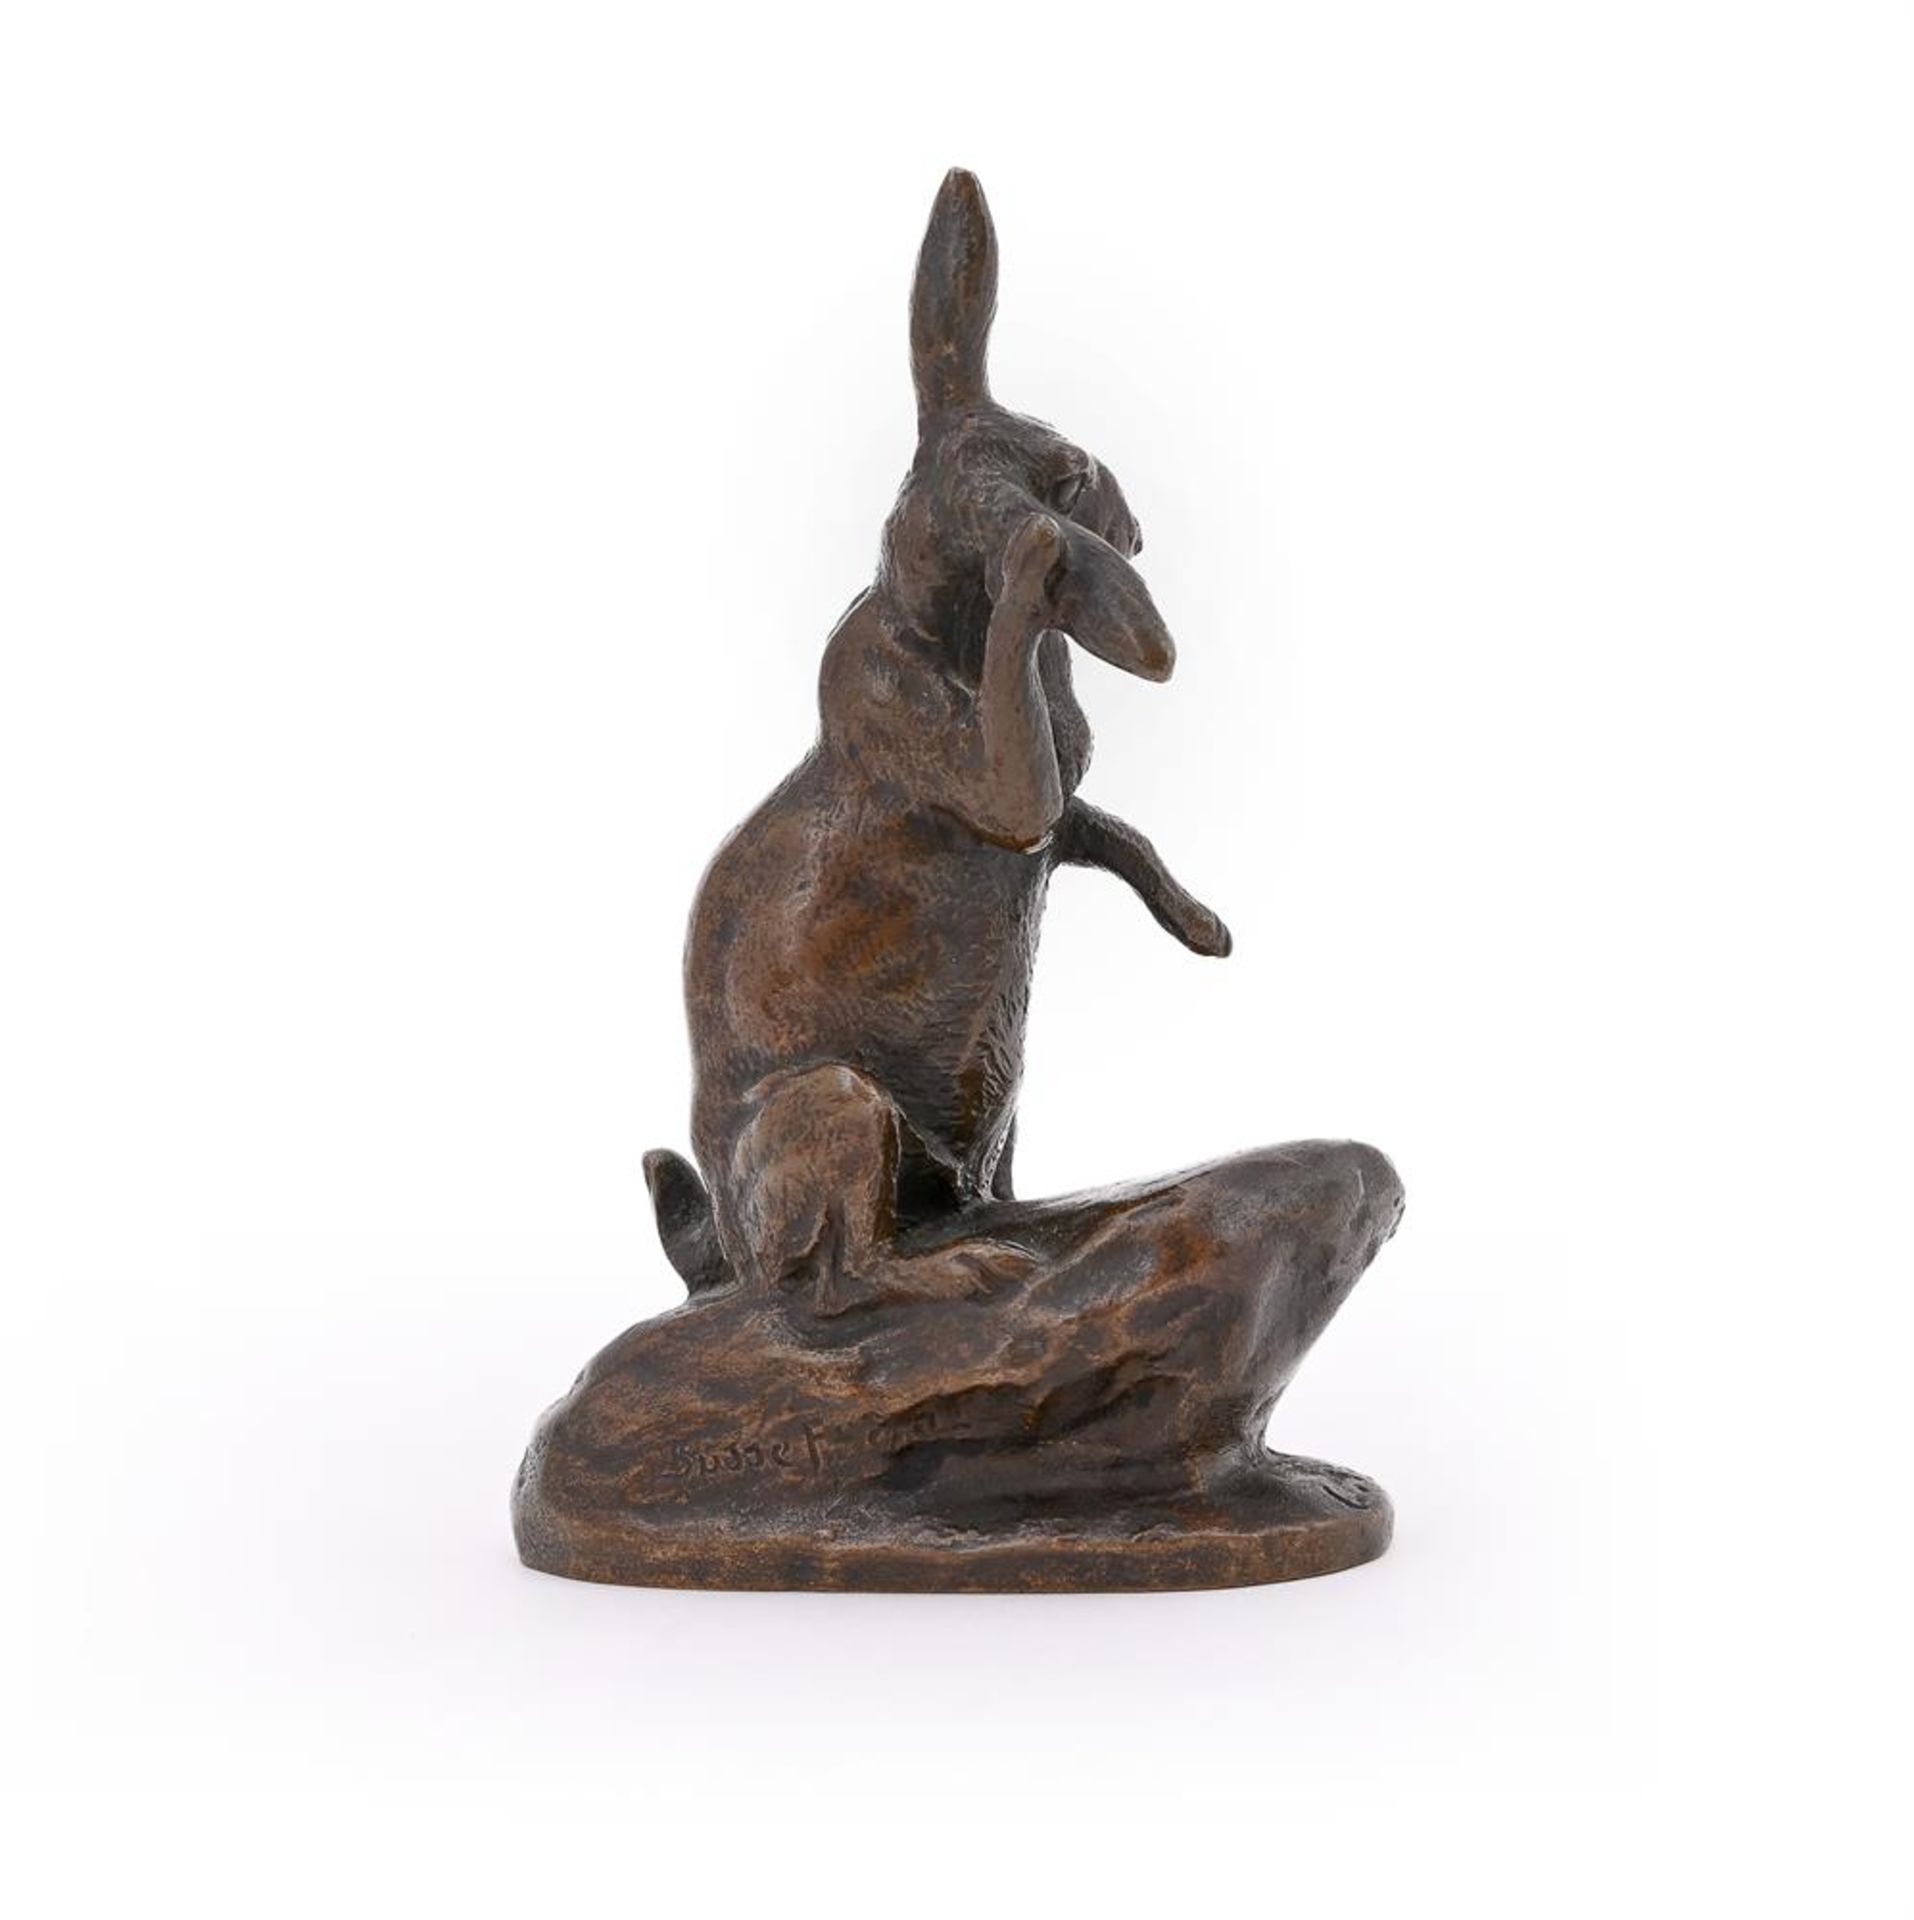 CLOVIS-EDMOND MASSON (FRENCH, 1838-1913), A BRONZE MODEL OF A HARE GROOMING ITS EAR - Image 2 of 4